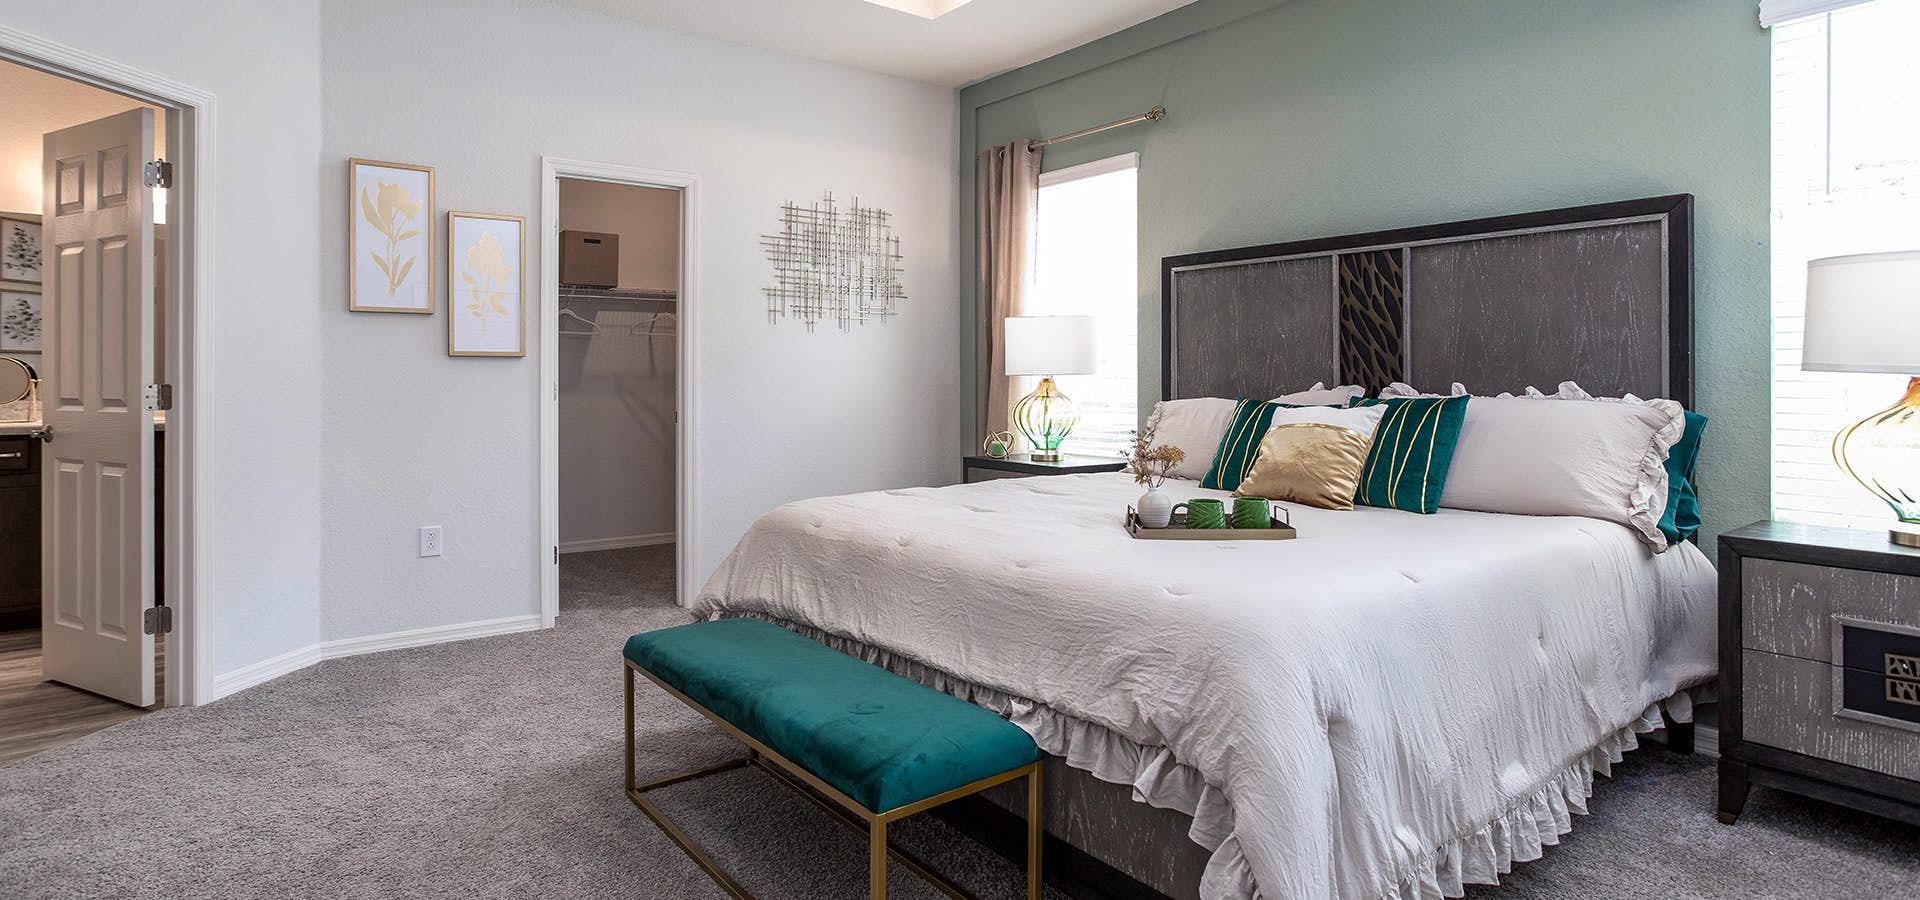 Large master bedroom with soft sage green interior paint